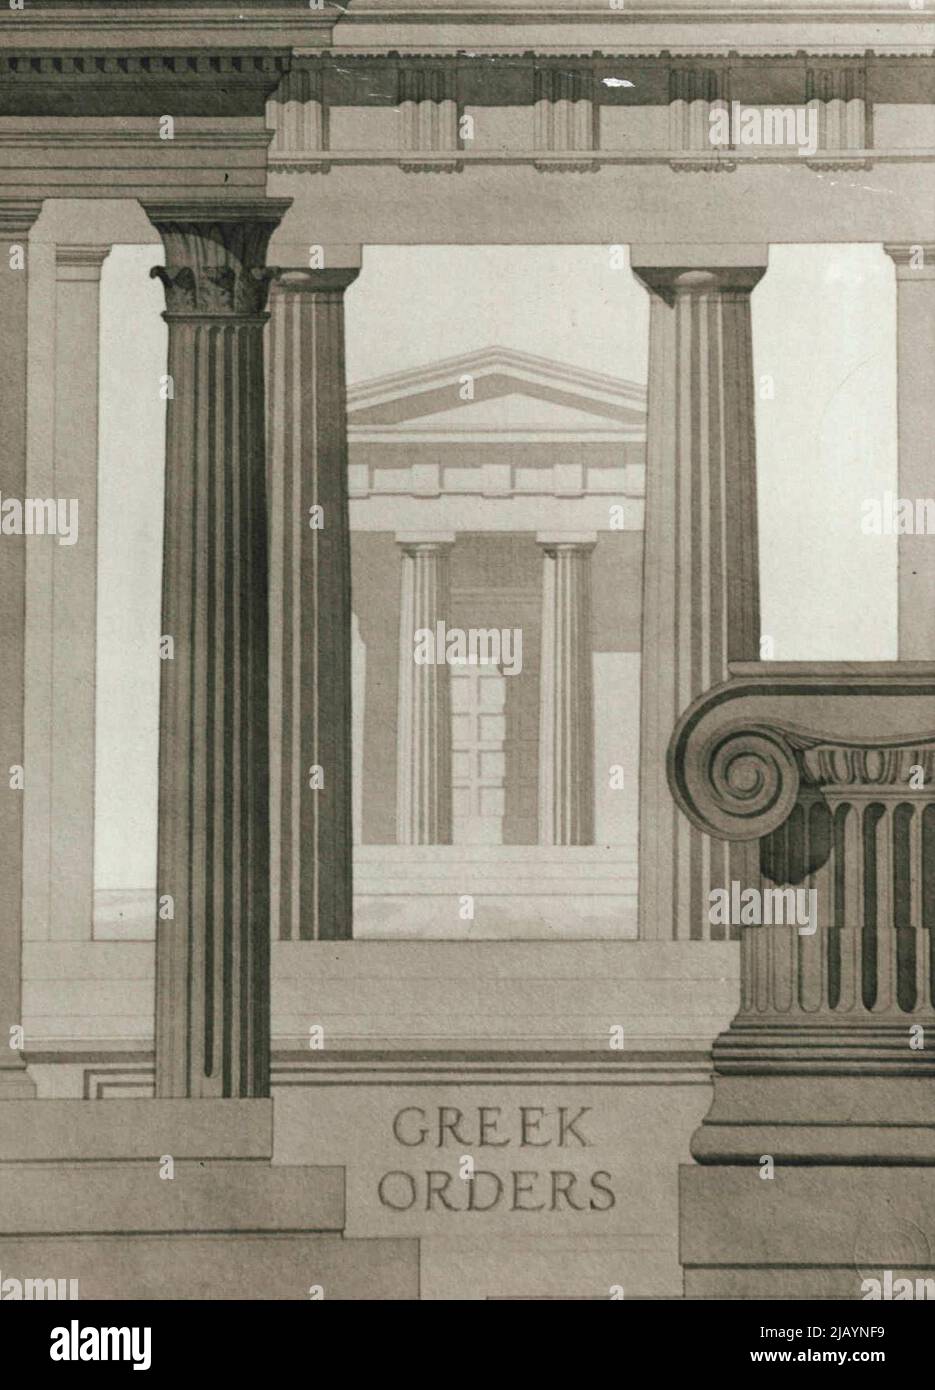 Architectural exhibition which opens today at Farmers Backland galleries classic study by W.H. Bell Greek orders. May 25, 1936. (Photo by Alec Iverson/Fairfax Media). Stock Photo